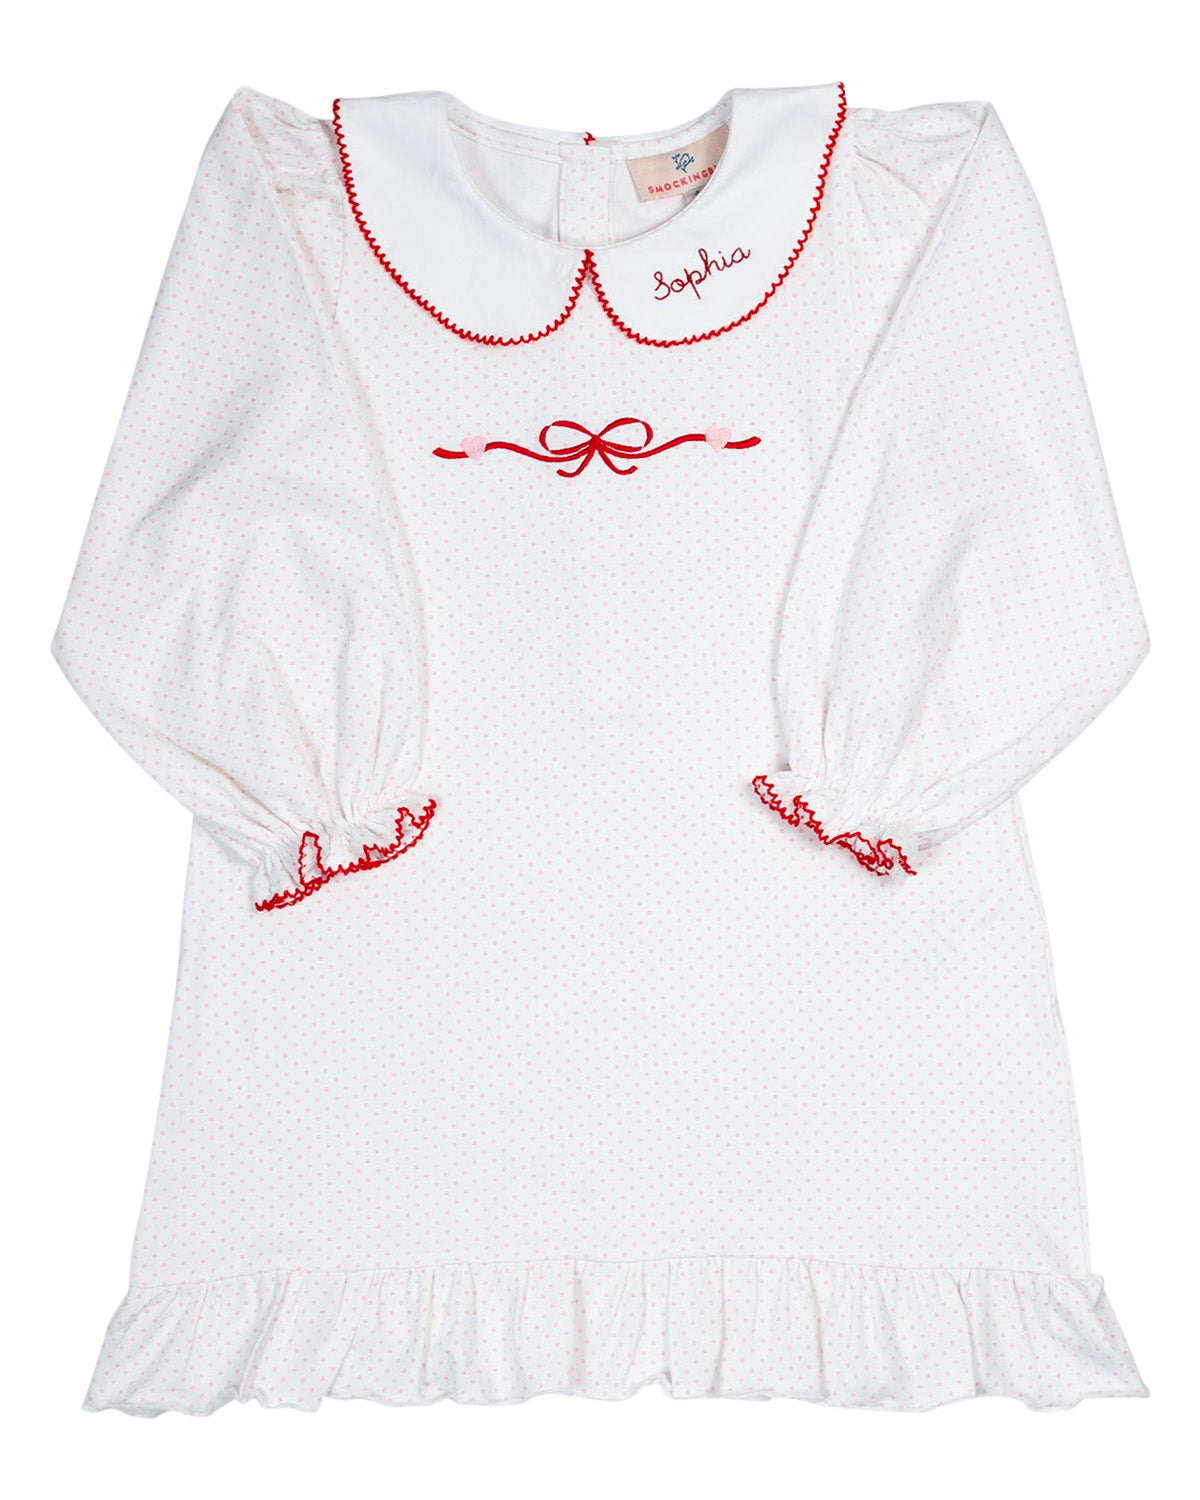 Bow with Hearts Embroidered Knit Dress- FINAL SALE